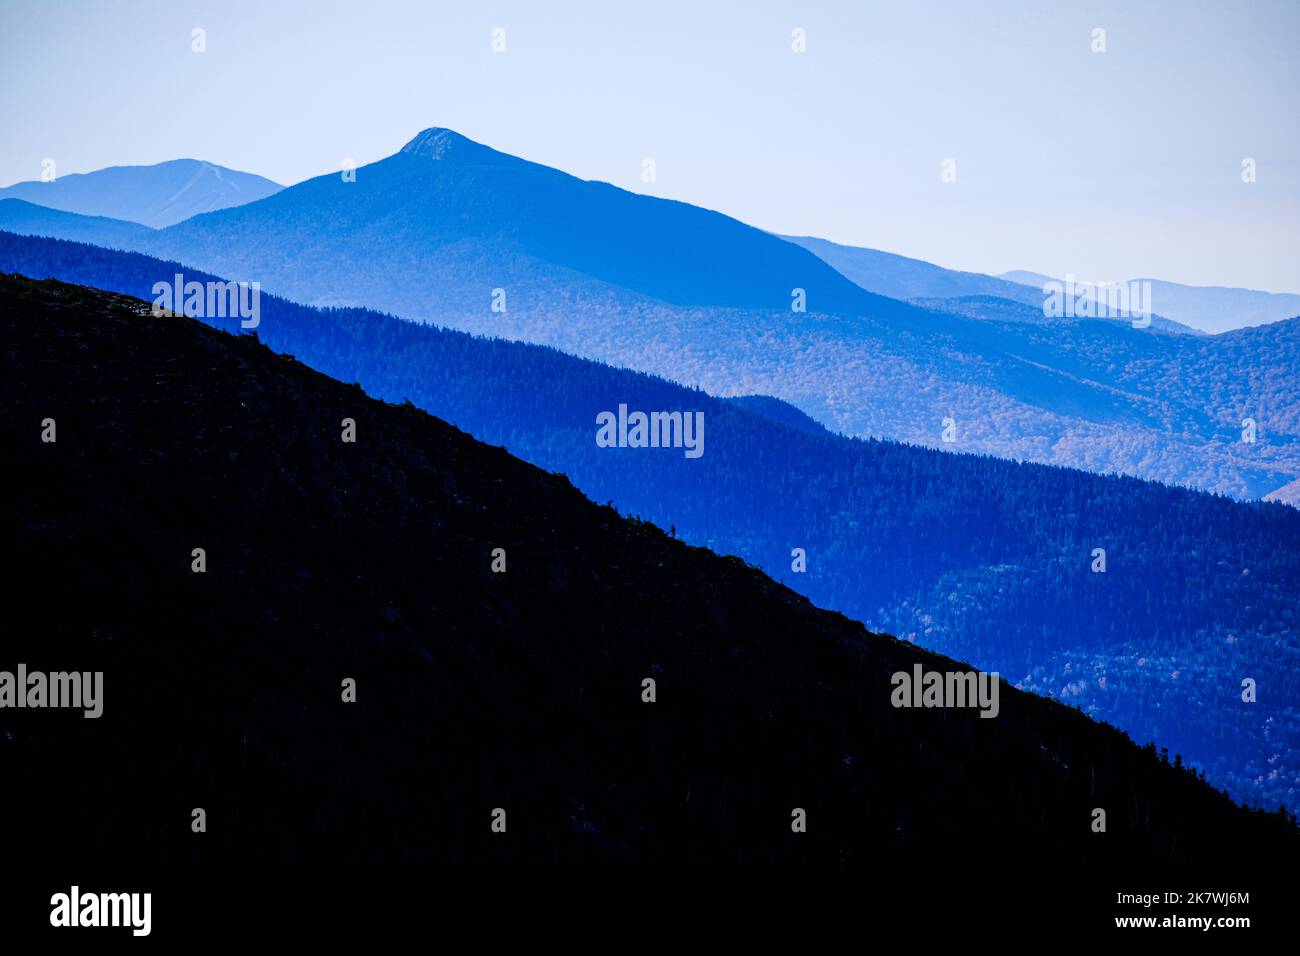 View of Camels Hump mountain from Mt. Mansfield, Stowe, VT, New England, USA, the highest mountain in Vermont. Stock Photo